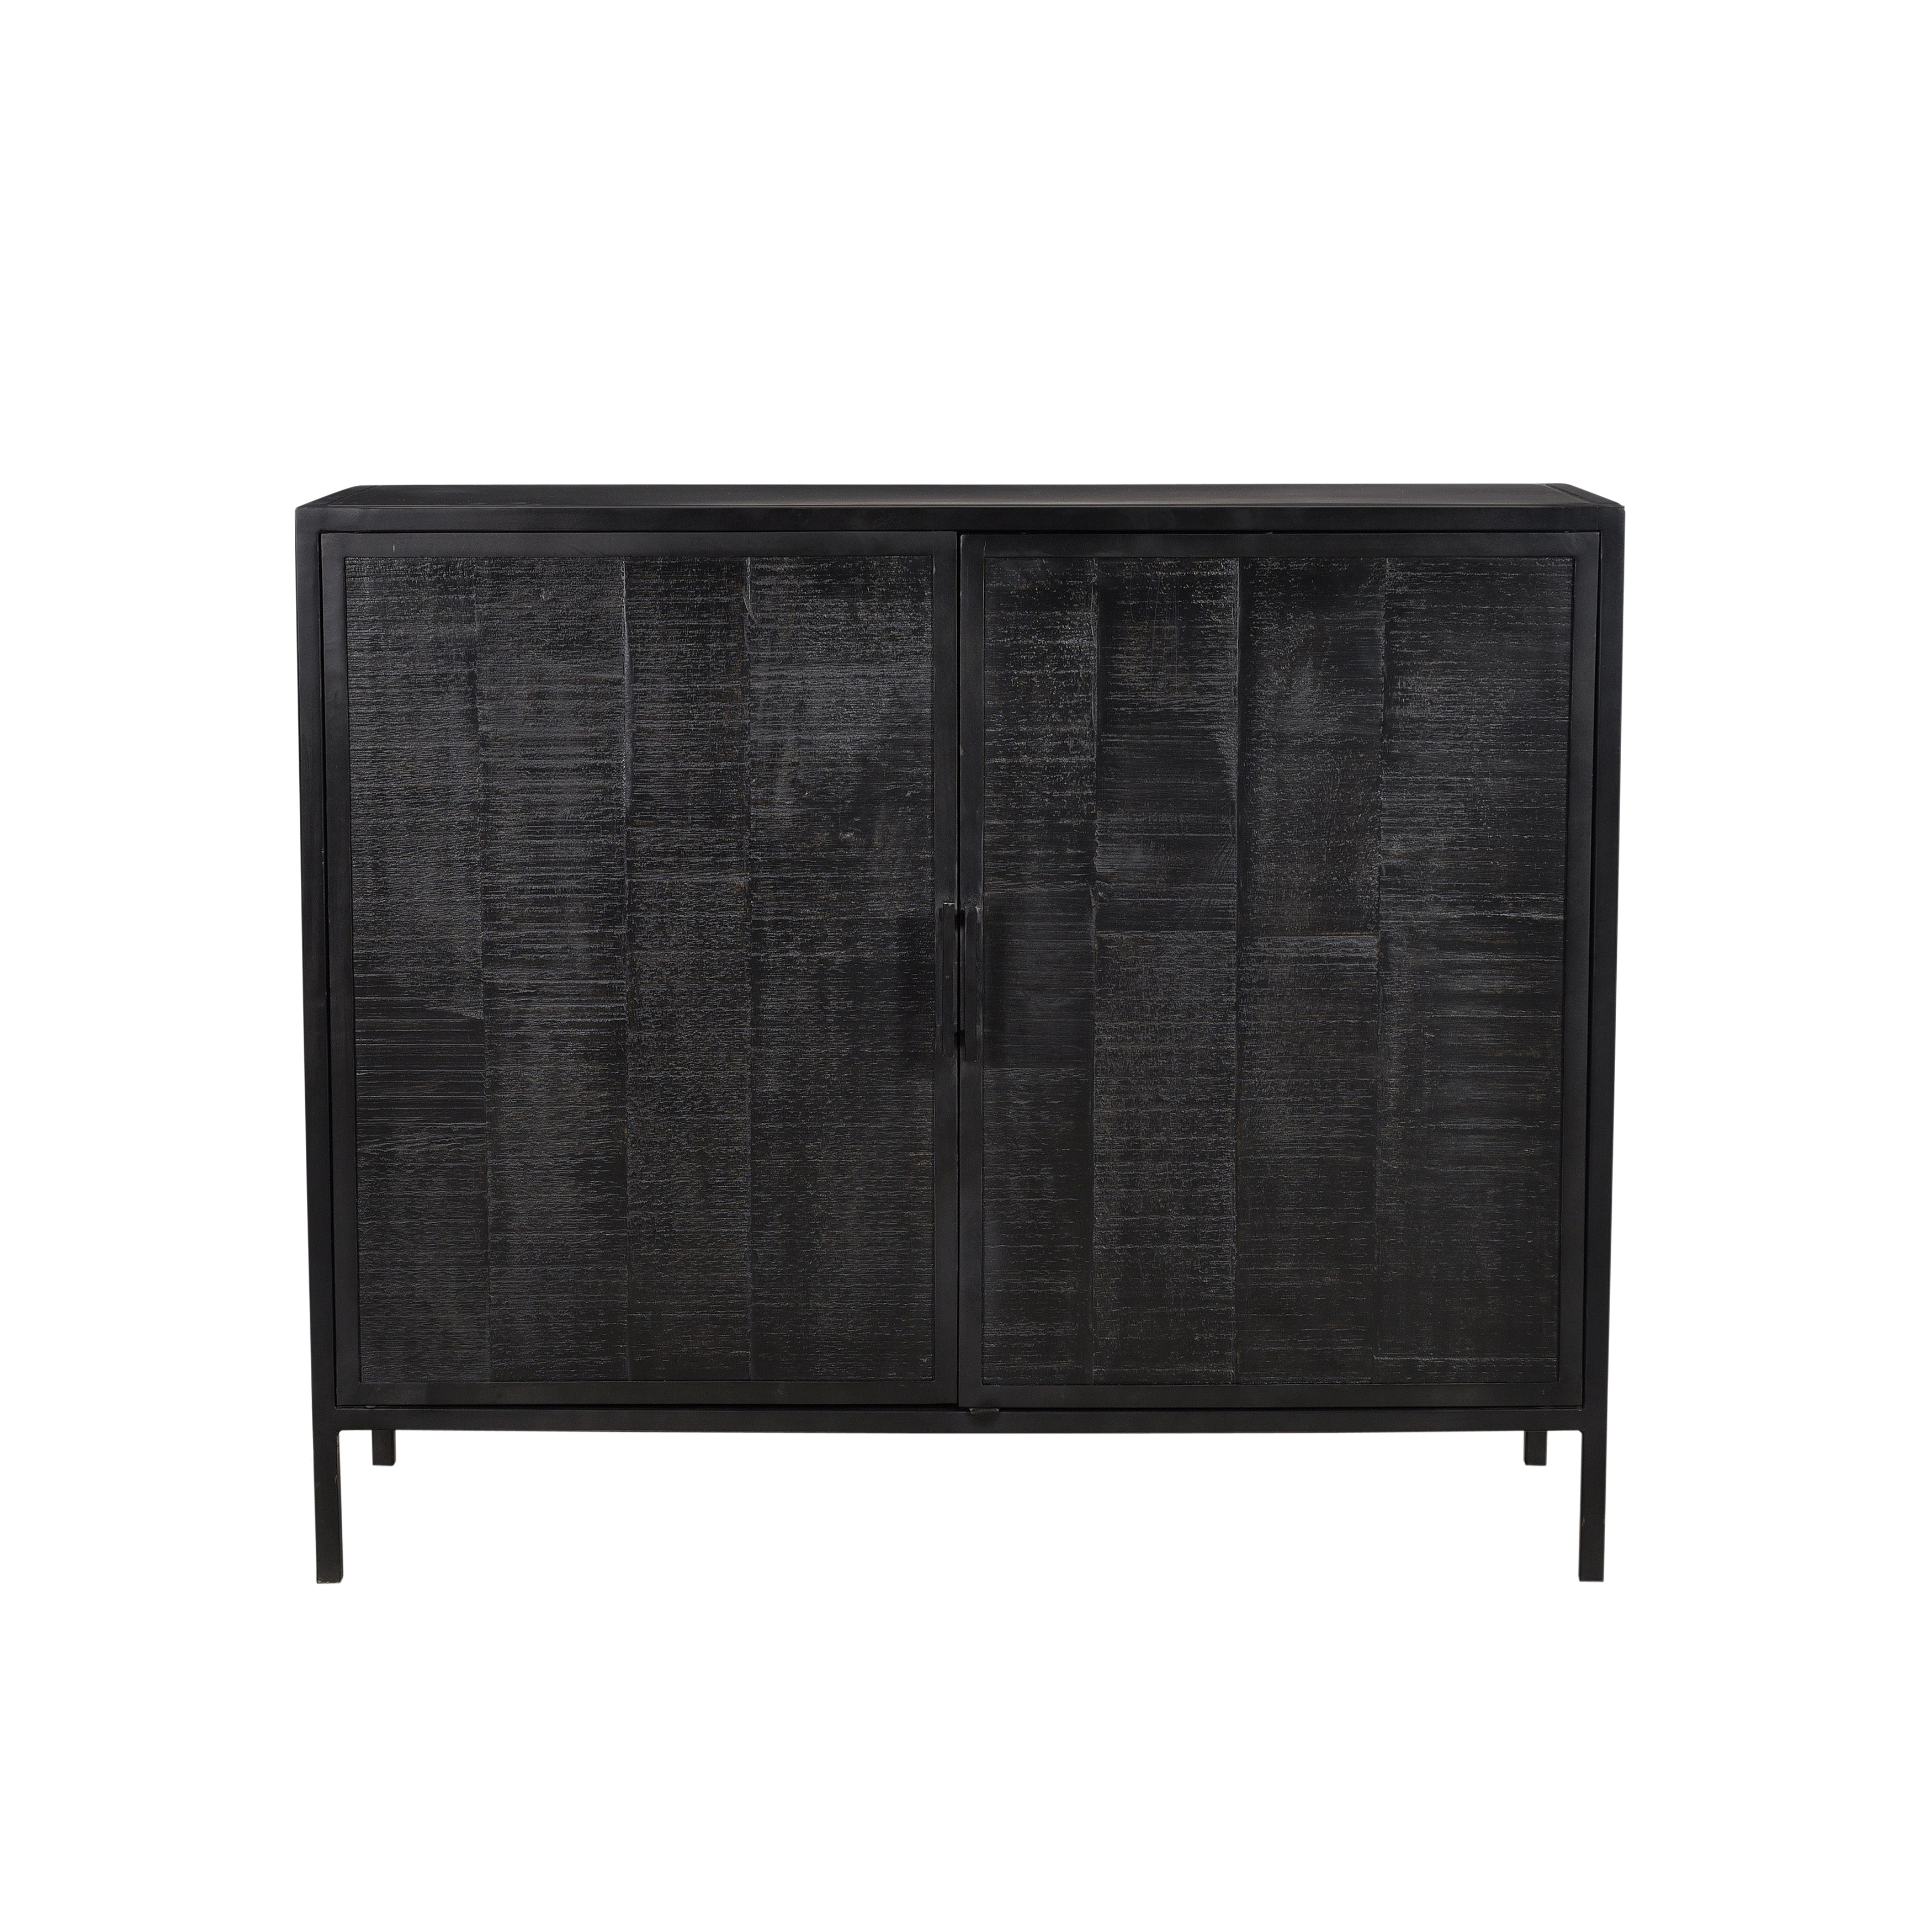 Dark and mysterious, this 42” sideboard makes for the perfect moody addition to your décor. Made from solid mango wood in a dark charcoal antique finish, this two-door sideboard is ready to meet all your storage and design needs. The set of butterfly doors open to large cabinet space with an interior shelf. Amethyst Home provides interior design, new home construction design consulting, vintage area rugs, and lighting in the Austin metro area.